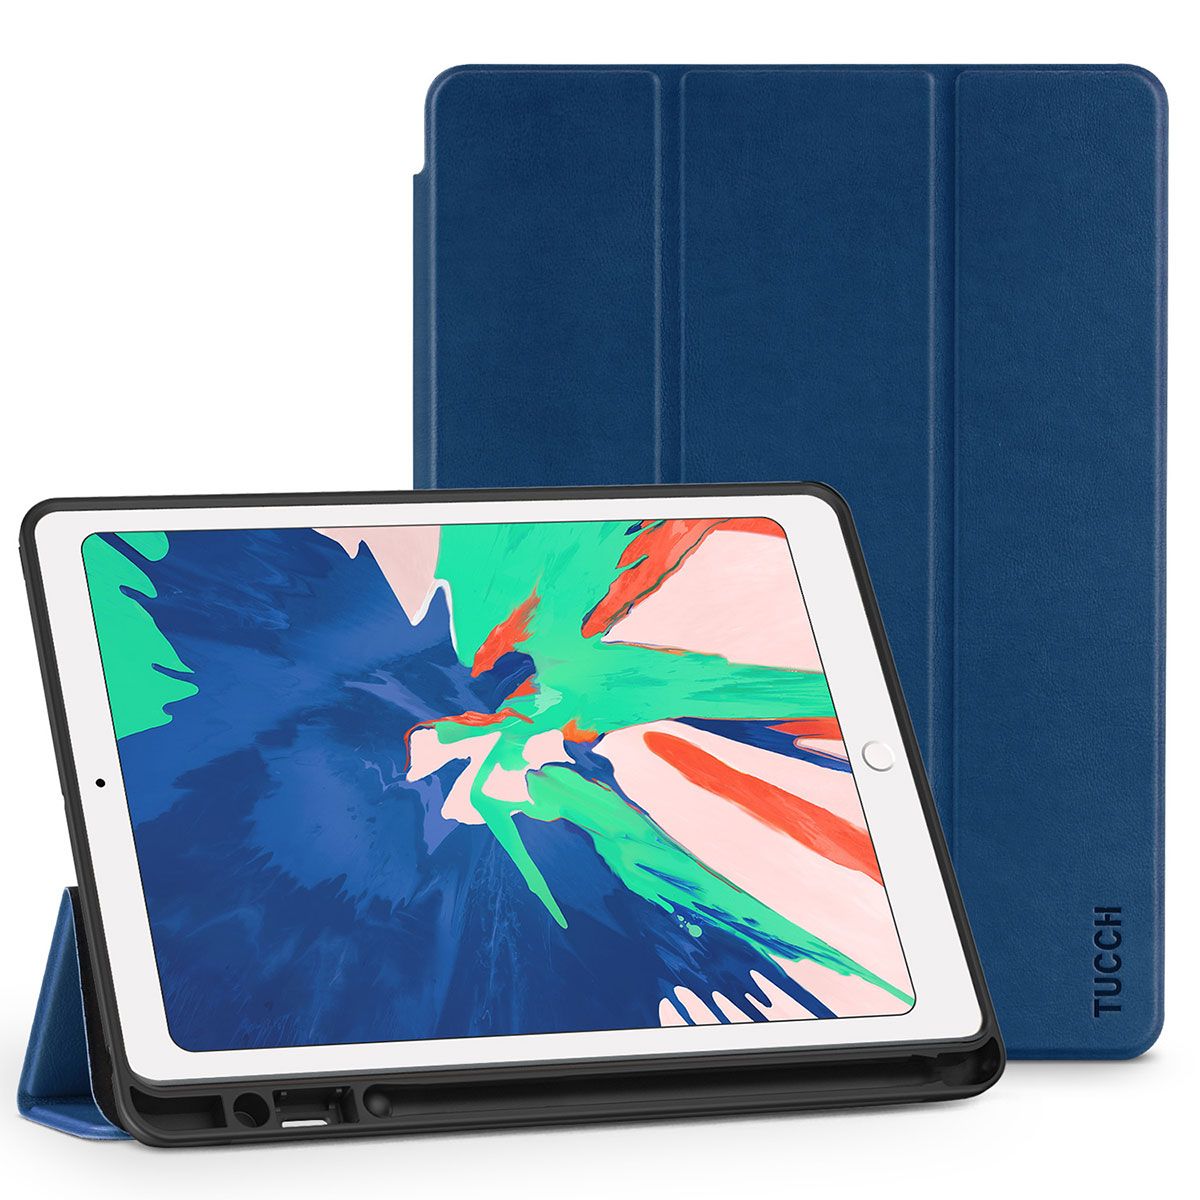  Twelve South BookBook for iPad Air/Pro 10.5  Hardback Leather  case, Pencil Storage and Easel for iPad Pro/Air + Apple Pencil : Automotive